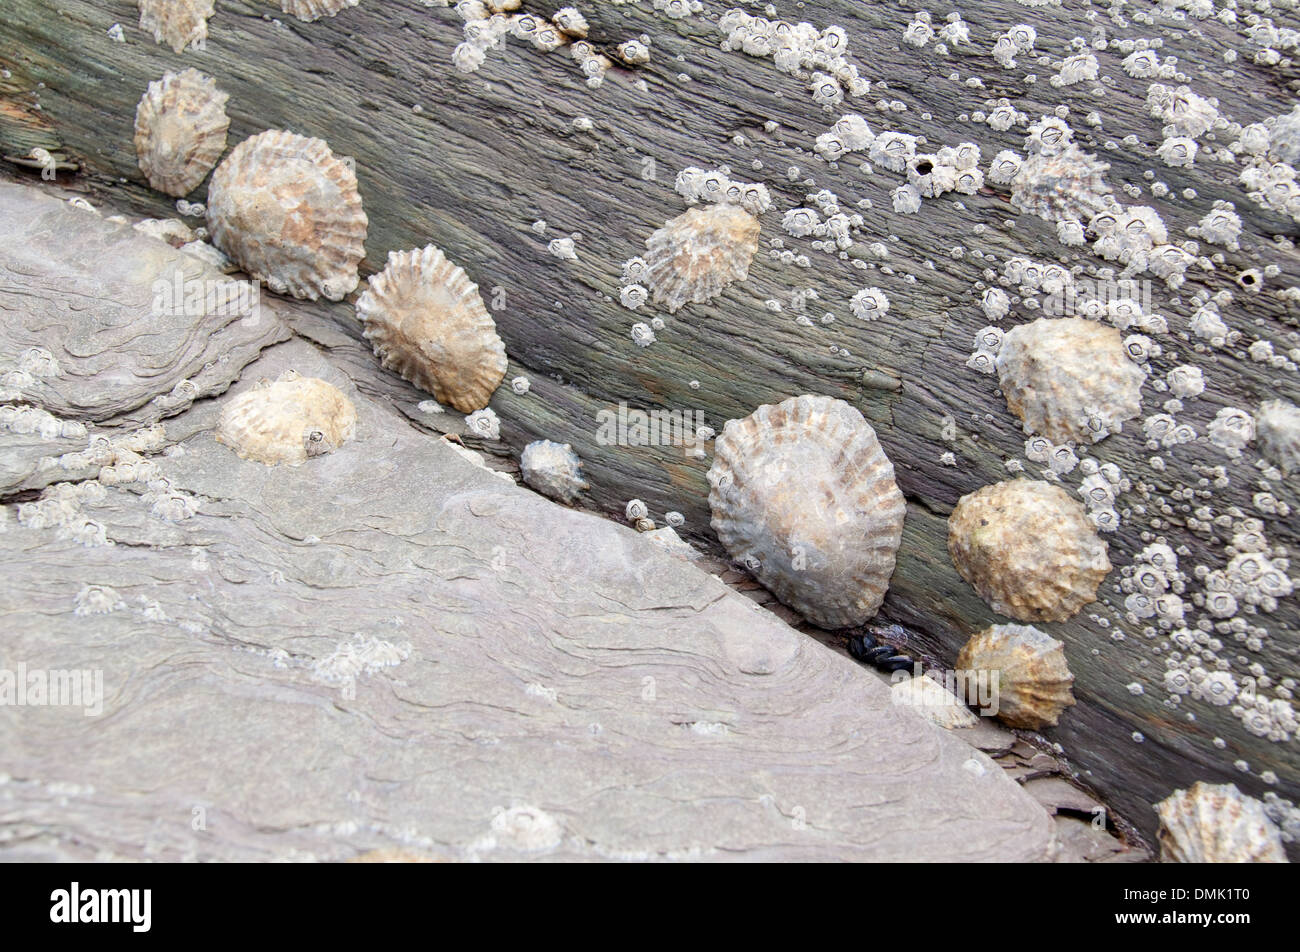 Limpets and barnacles, Devon, England. Stock Photo